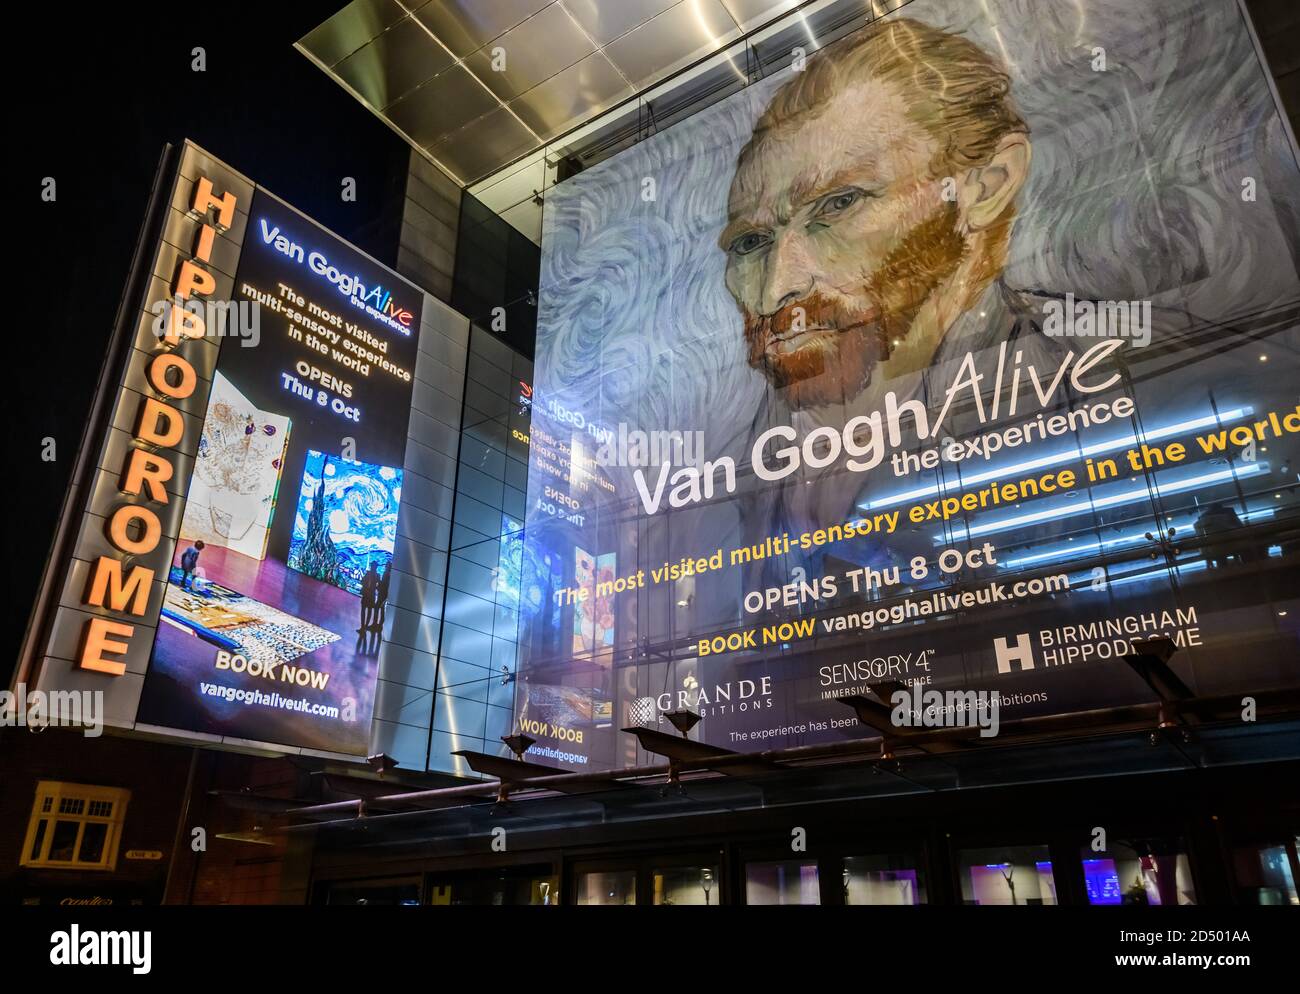 Birmingham, England, UK. 7th October 2020. A visitor at the preview of Van Gogh Alive at The Birmingham Hippodrome theatre in Birmingham, England, UK. The Birmingham Hippodrome is hosting the UK premiere of Van Gogh Alive, a multi-sensory arts and entertainment experience. This is the first time the theatre has reopened to the public since lockdown began in March. The stage and auditorium have been converted into a huge gallery space to house the exhibition. Stock Photo